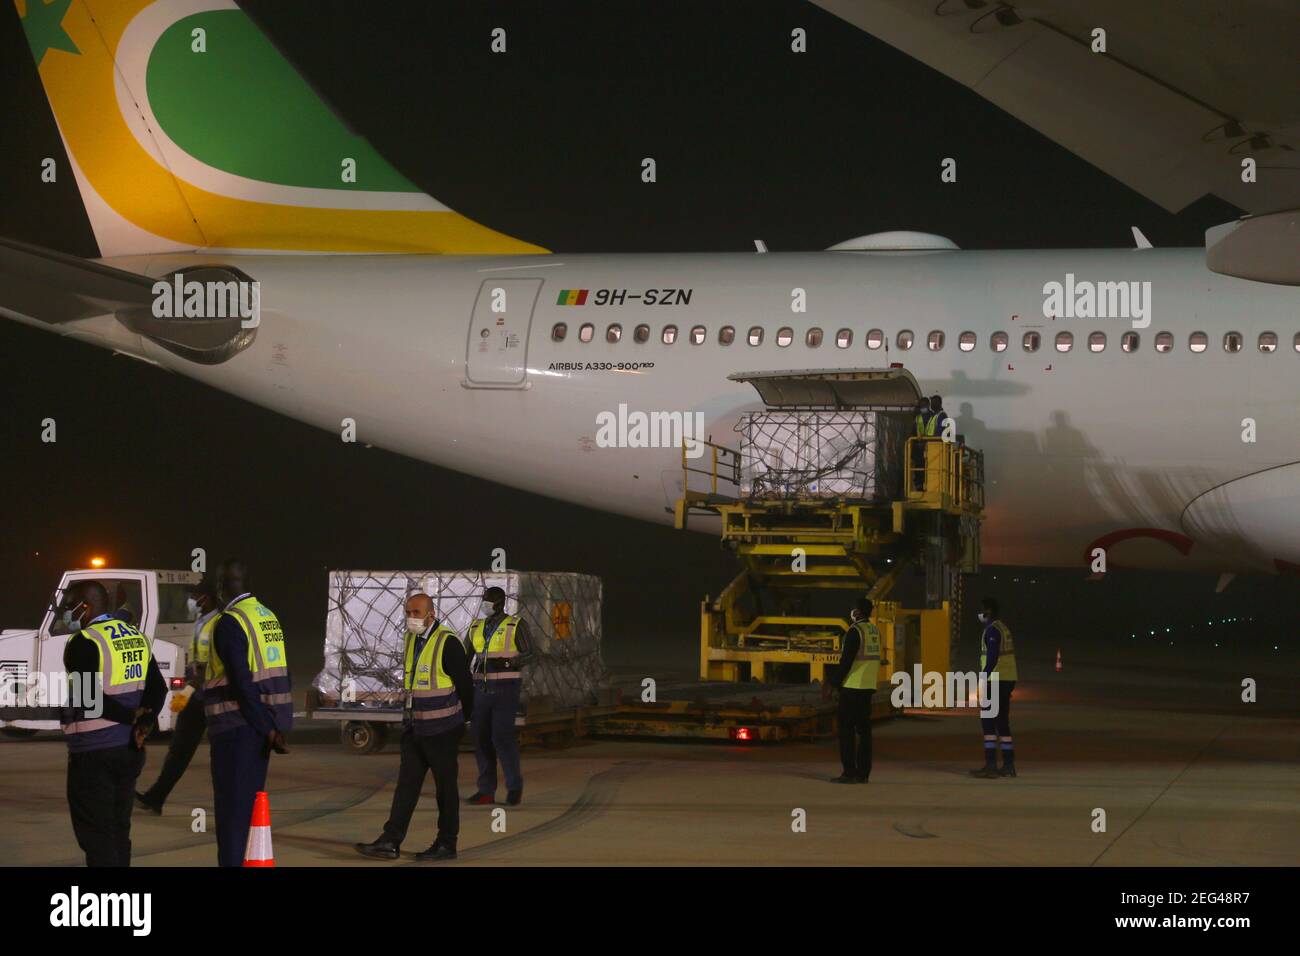 Dakar, Senegal. 17th Feb, 2021. Workers unload the first batch of China's Sinopharm COVID-19 vaccine at Blaise Diagne International Airport in Dakar, Senegal, Feb. 17, 2021. Senegal on Wednesday night received the first batch of China's Sinopharm COVID-19 vaccine. Credit: Xing Jianqiao/Xinhua/Alamy Live News Stock Photo